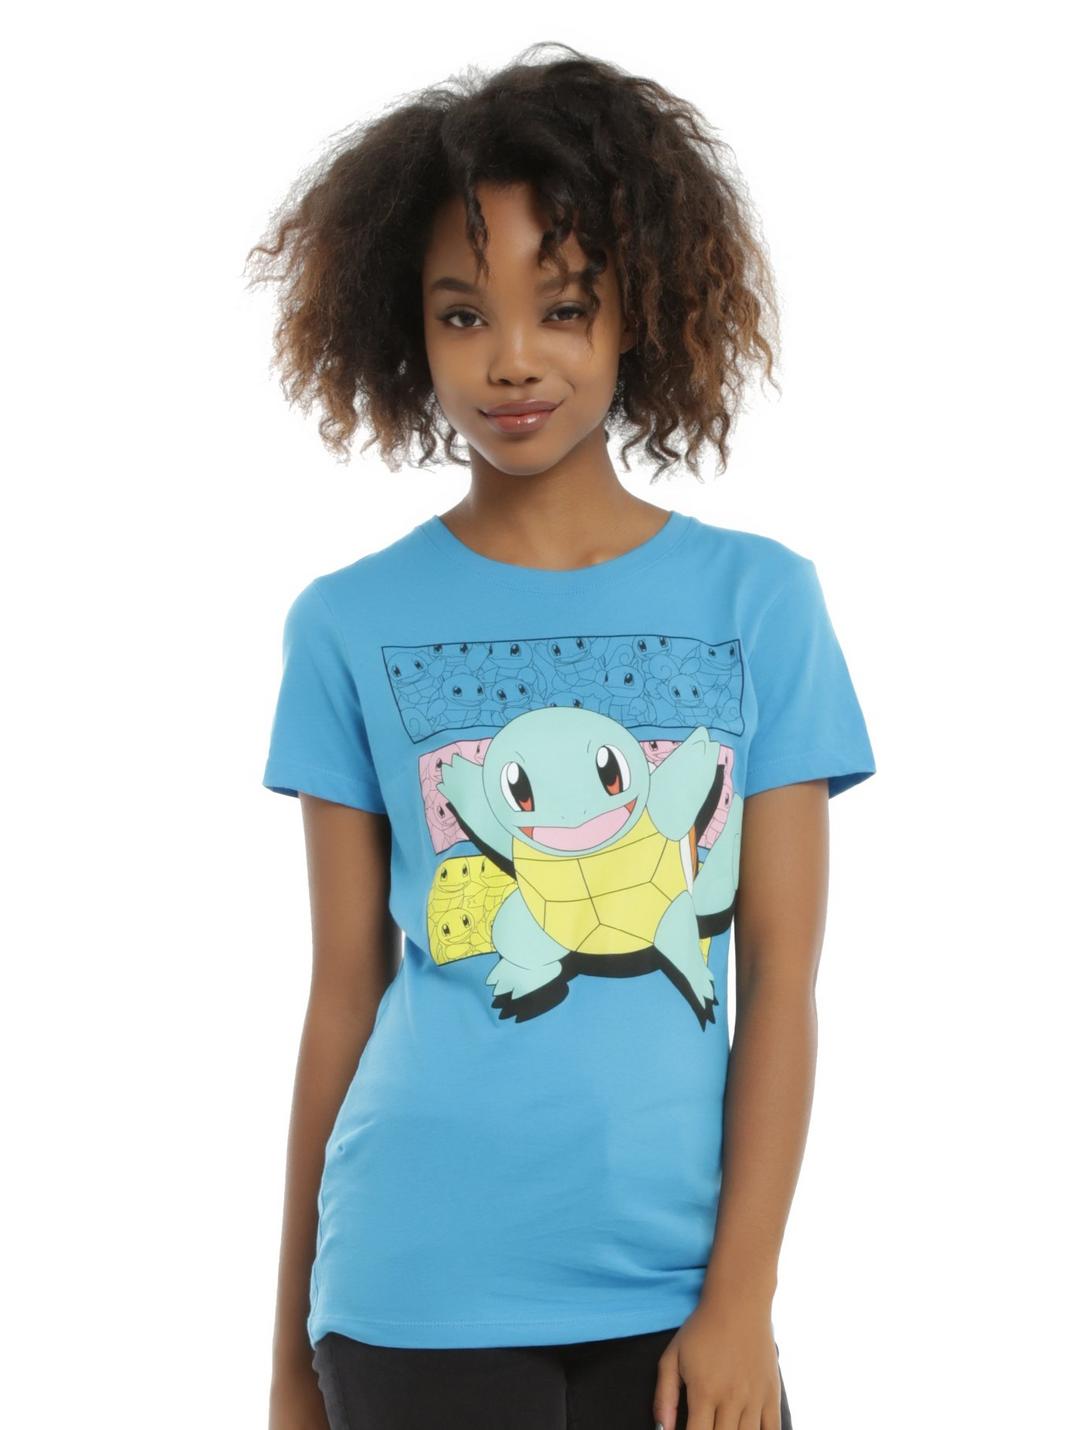 Pokemon Squirtle Girls T-Shirt, BLUE, hi-res